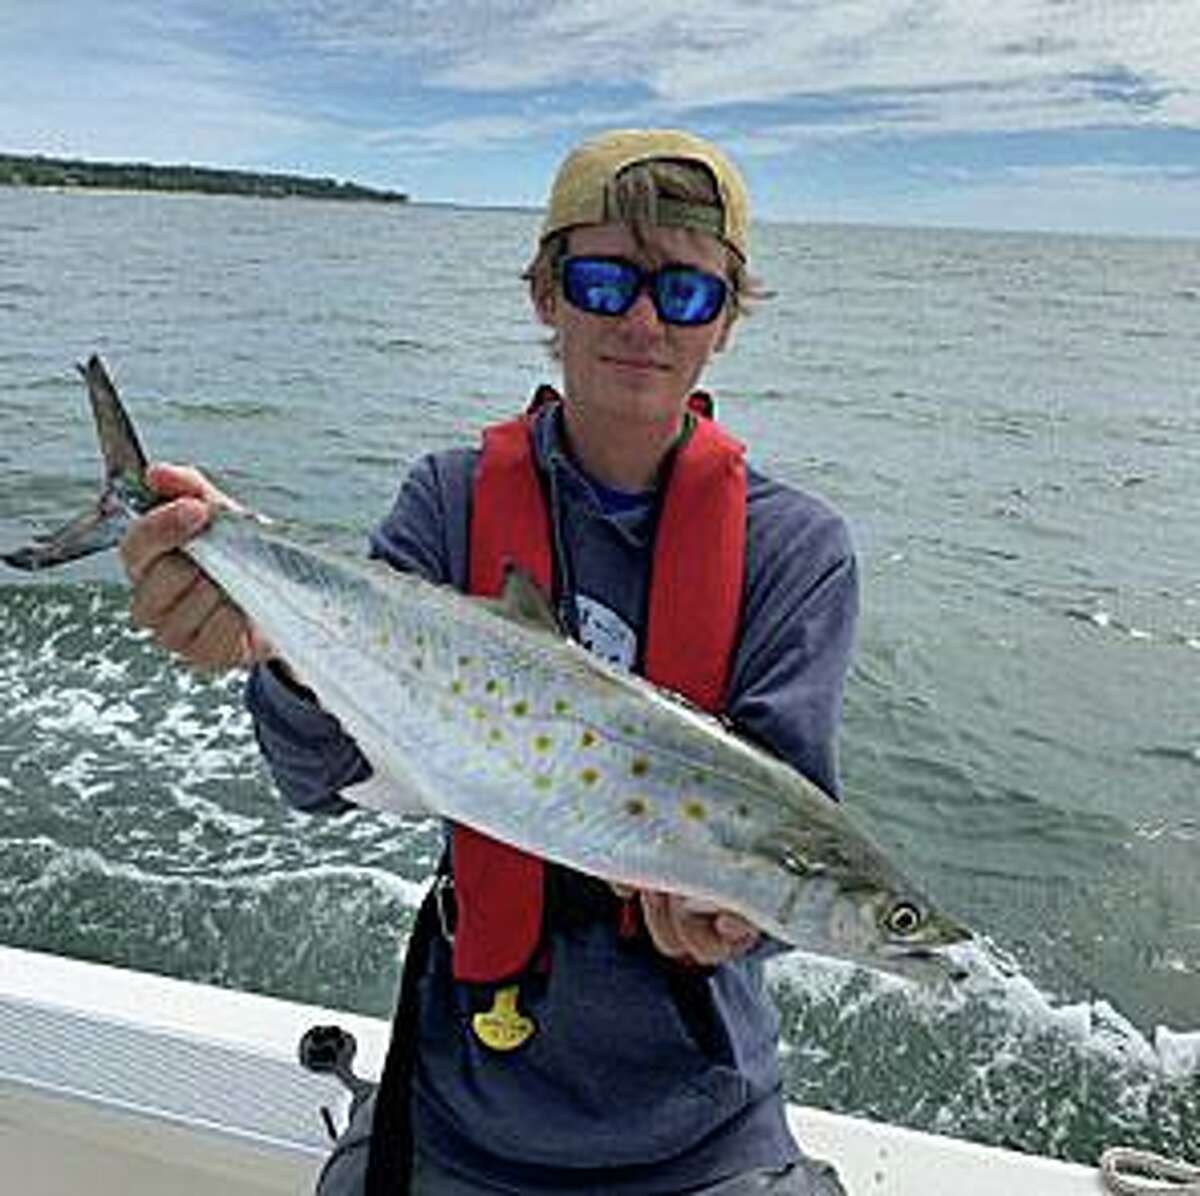 New state records were set for longest catch and release fish in Long Island Sound, the state Department of Energy and Environmental Protection has announced. Evan Kamoen, of Killingworth, caught a 20.75 inch Spanish mackerel, caught and released in Niantic. The accompanying photo must be taken at the location where the fish was caught and released. Fish cannot be taken from the site and then transported back and fish must be released alive. Click here to read about Connecticut’s saltwater state record fish.